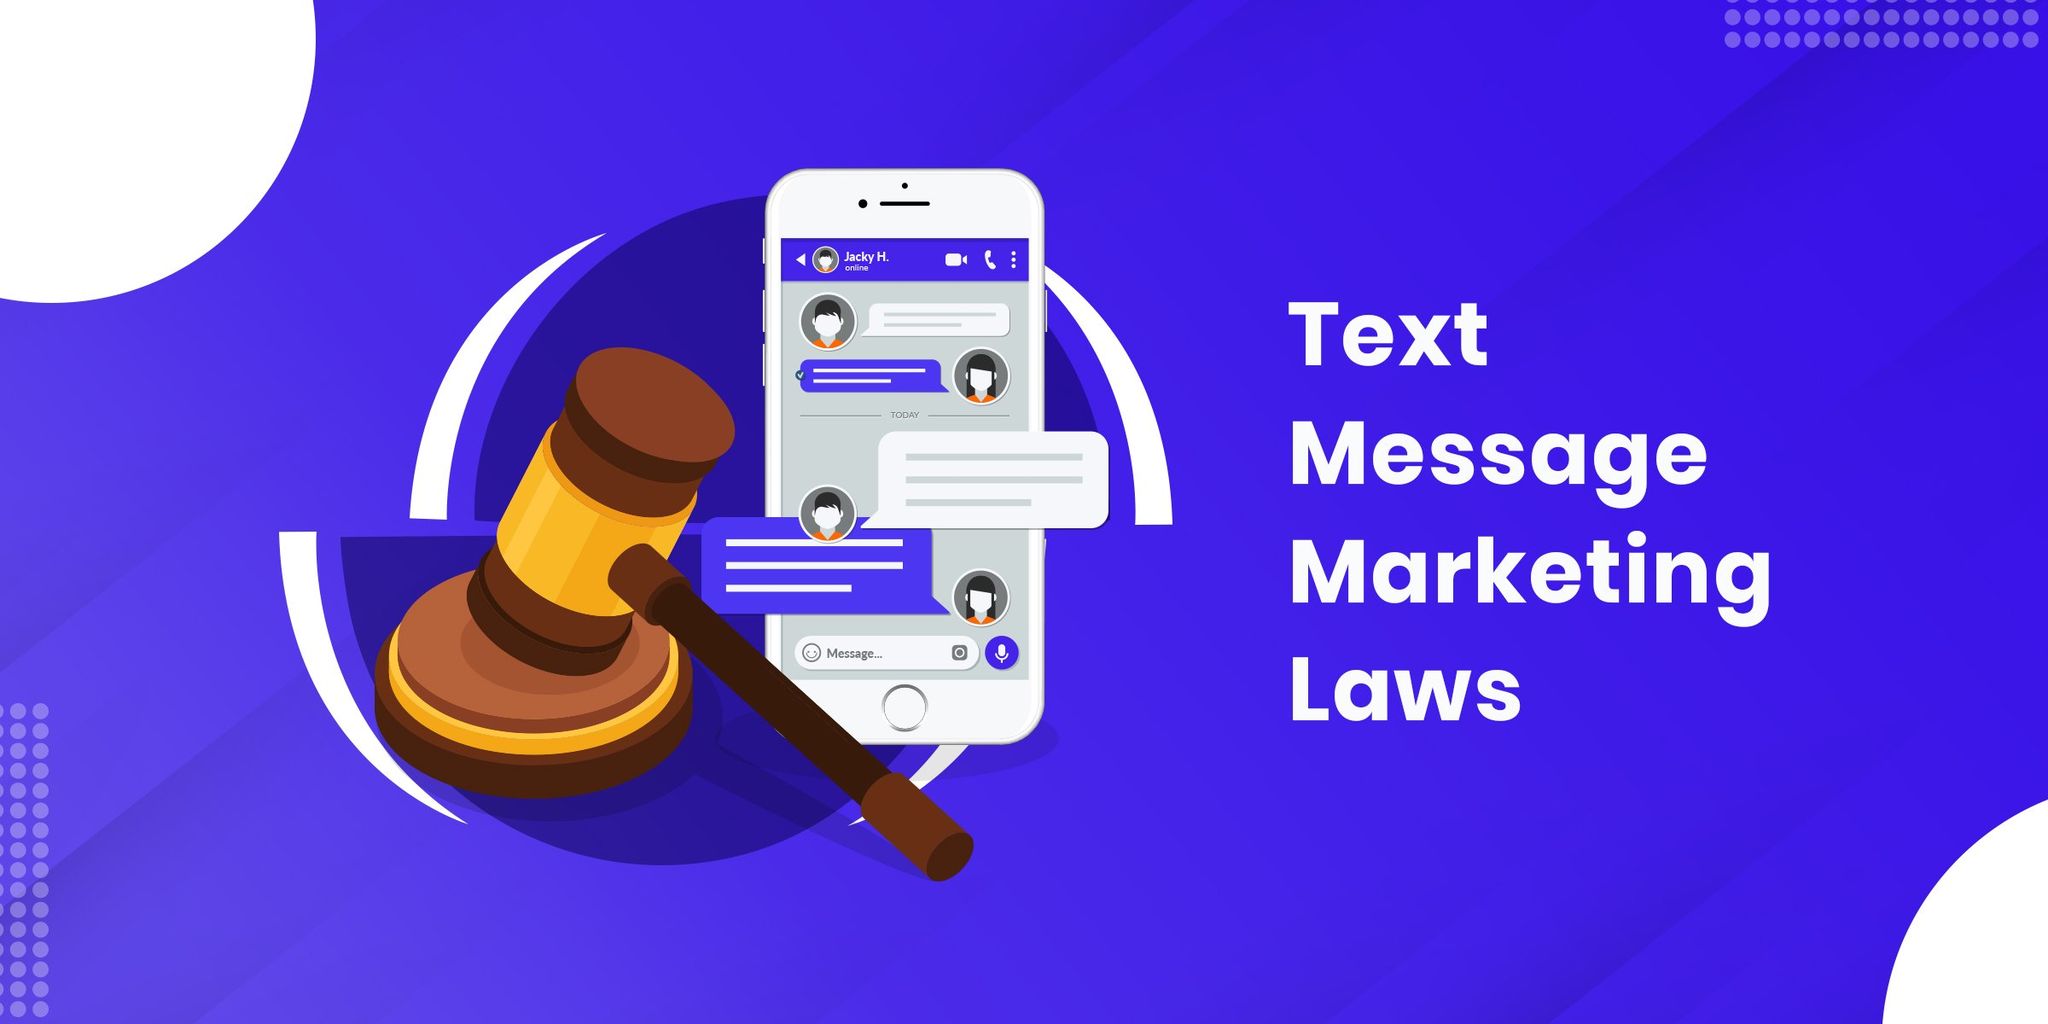 5 Ways to Stay Clear of the SMS Marketing Laws in Canada